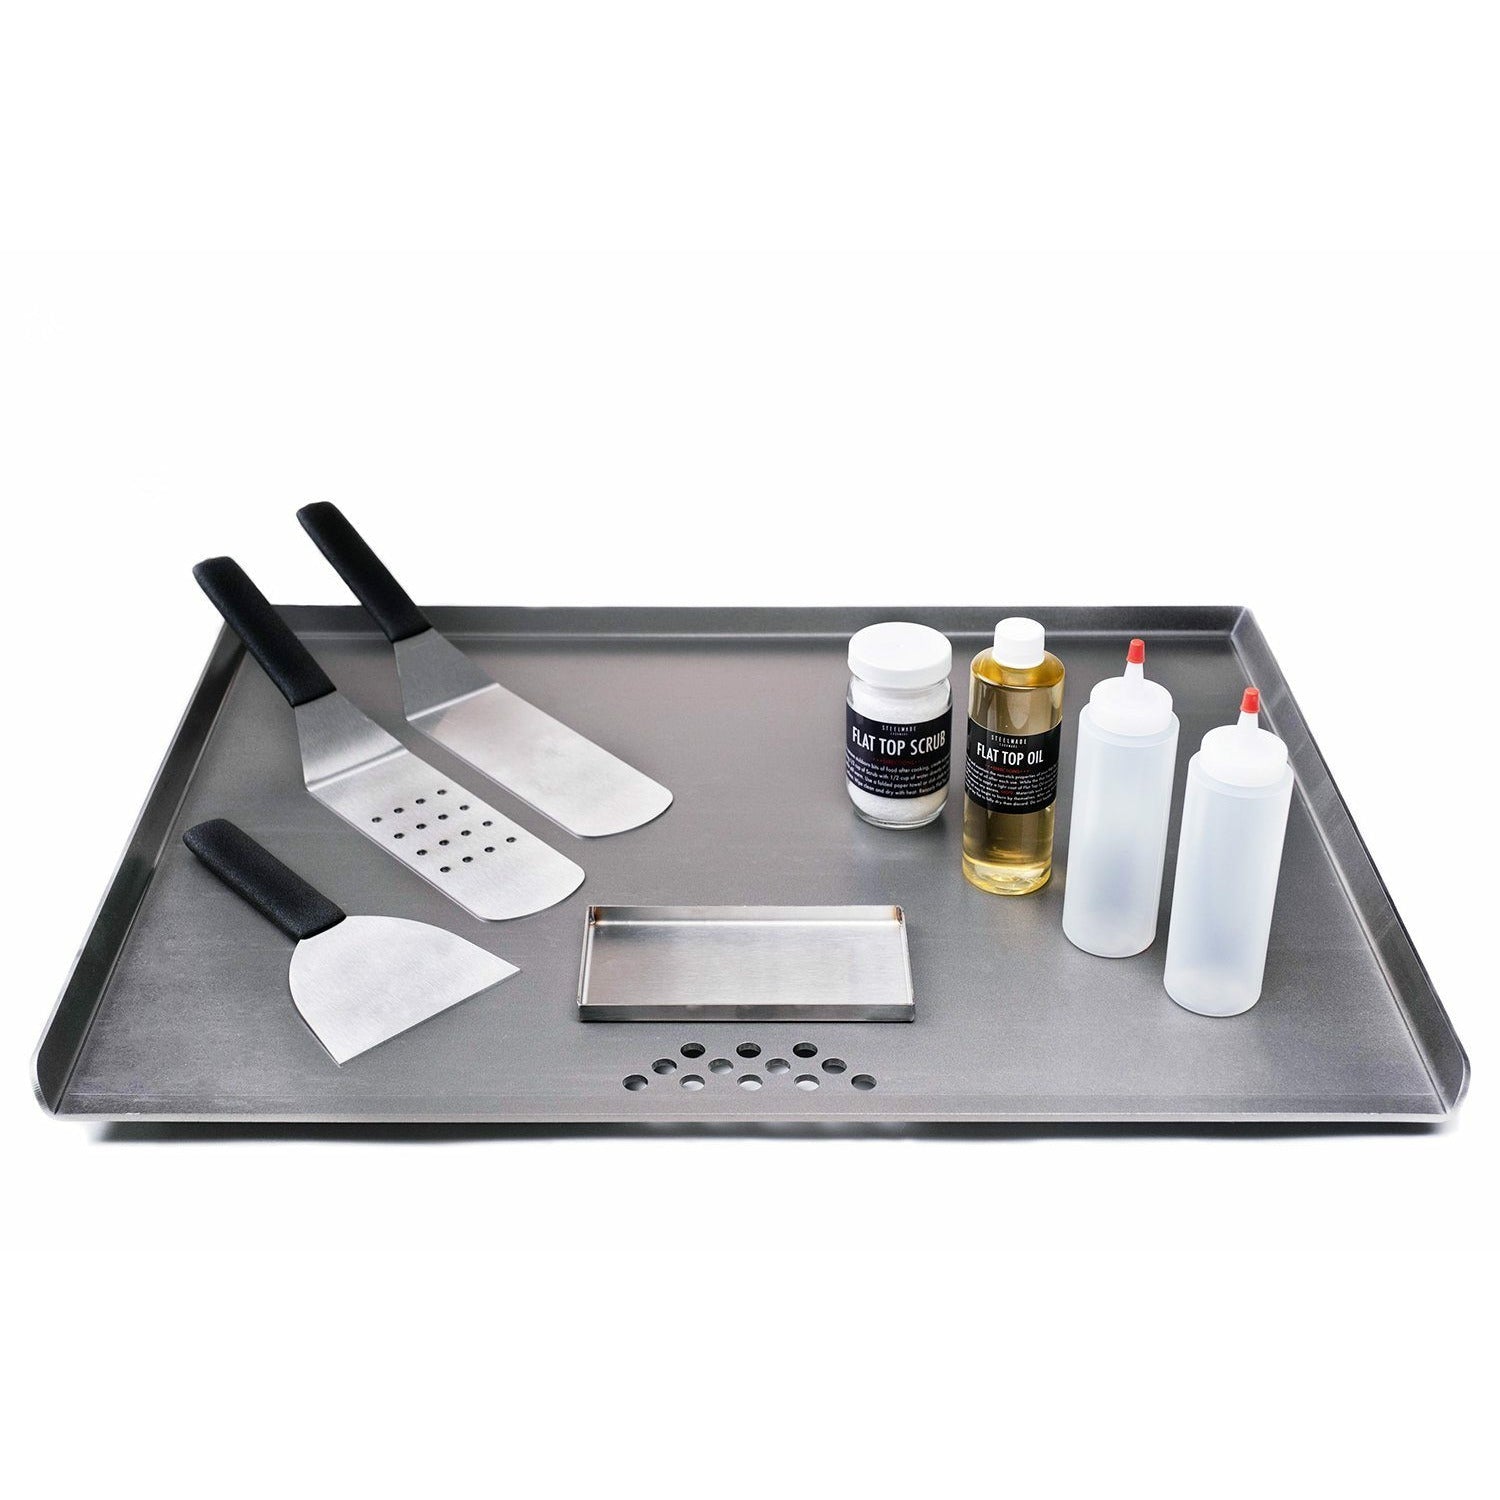 Best Stove Top Griddle For Electric Stove - First Hand Experience 